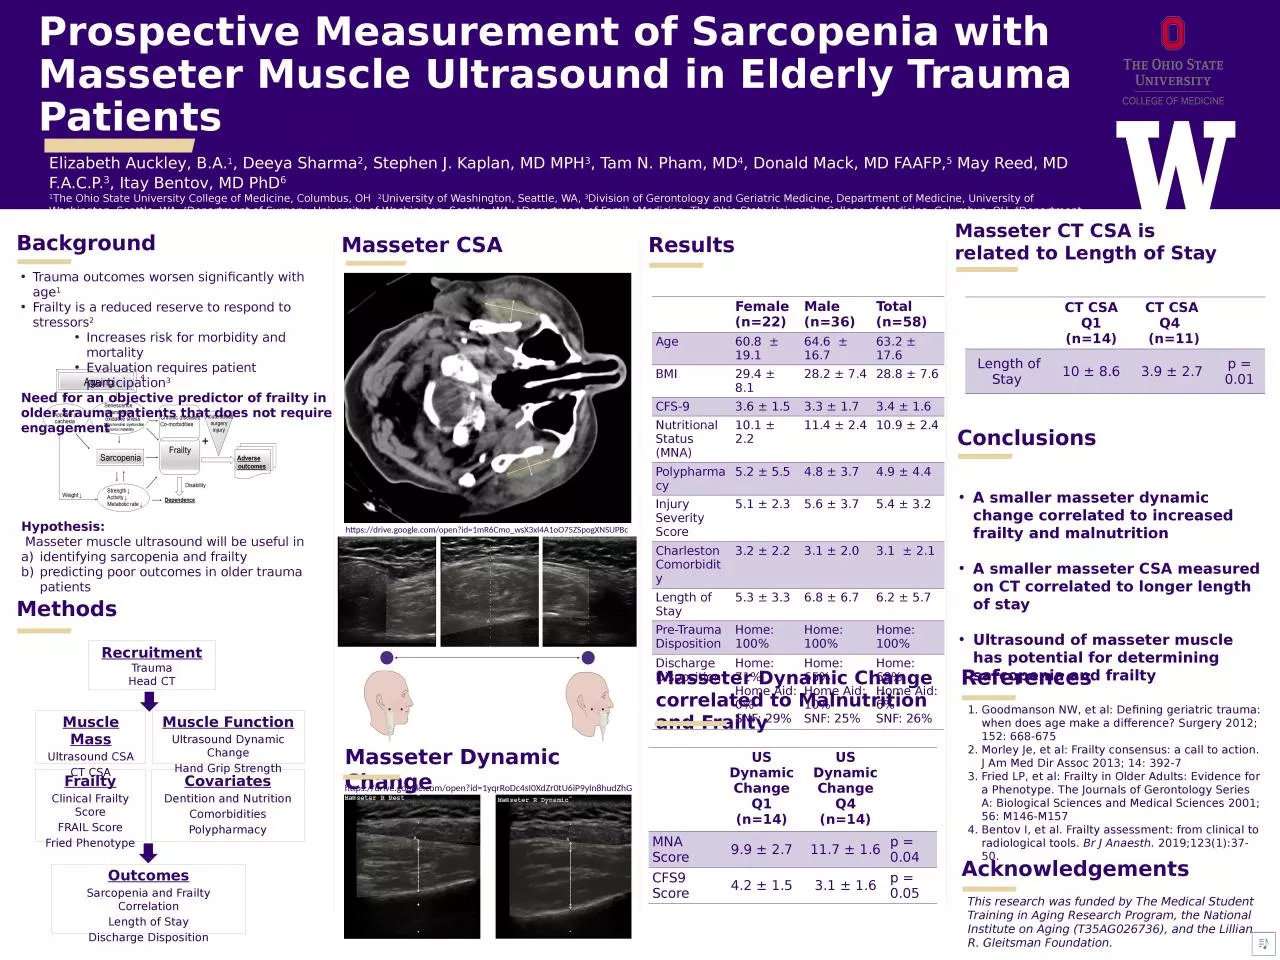 Prospective Measurement of Sarcopenia with Masseter Muscle Ultrasound in Elderly Trauma